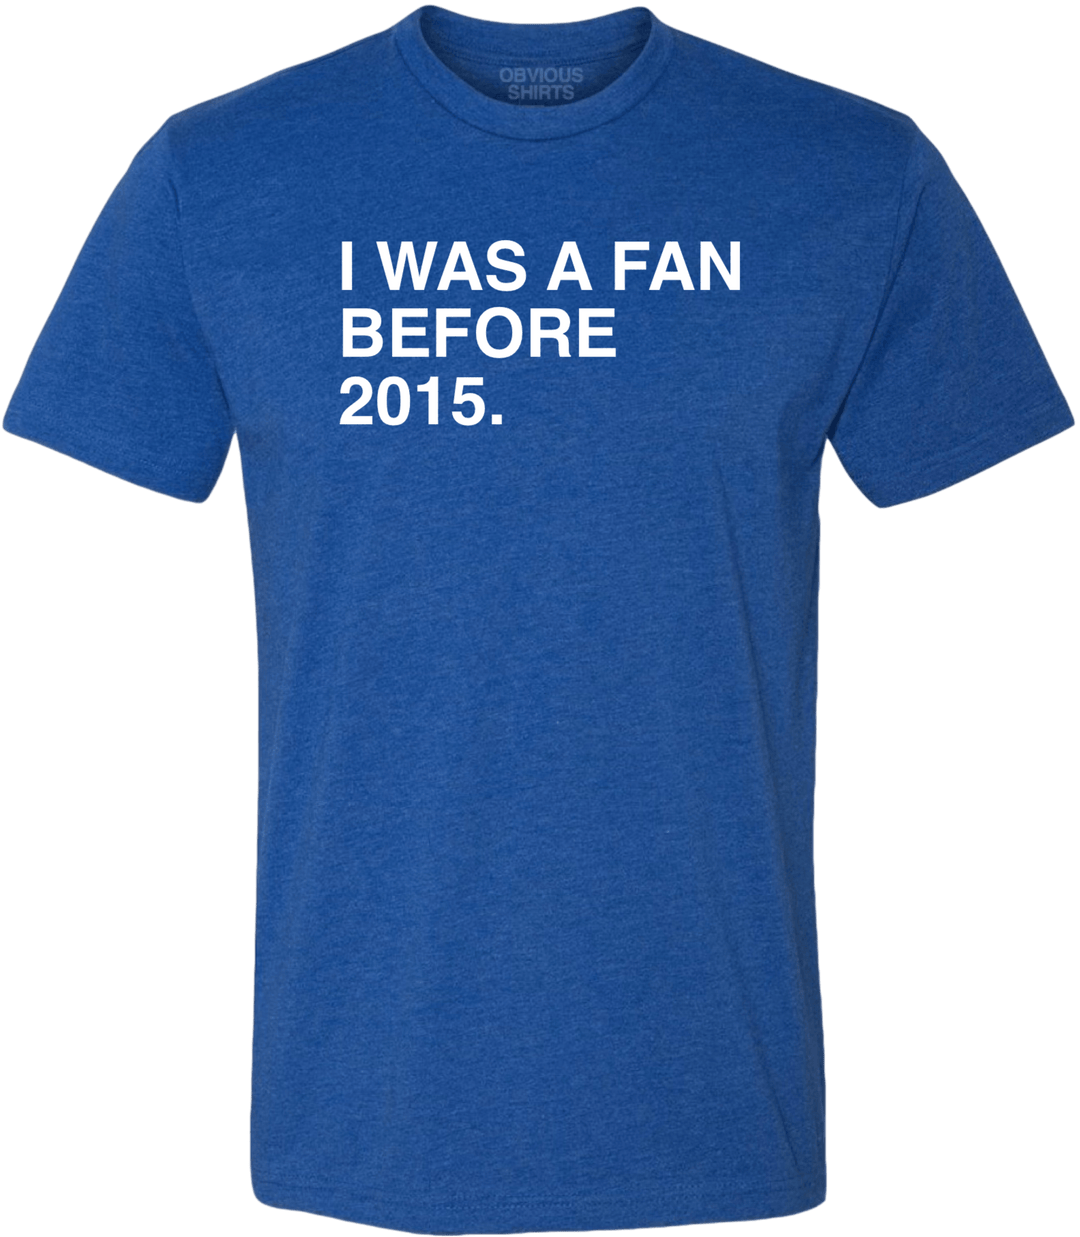 I WAS A FAN BEFORE 2015. - OBVIOUS SHIRTS.